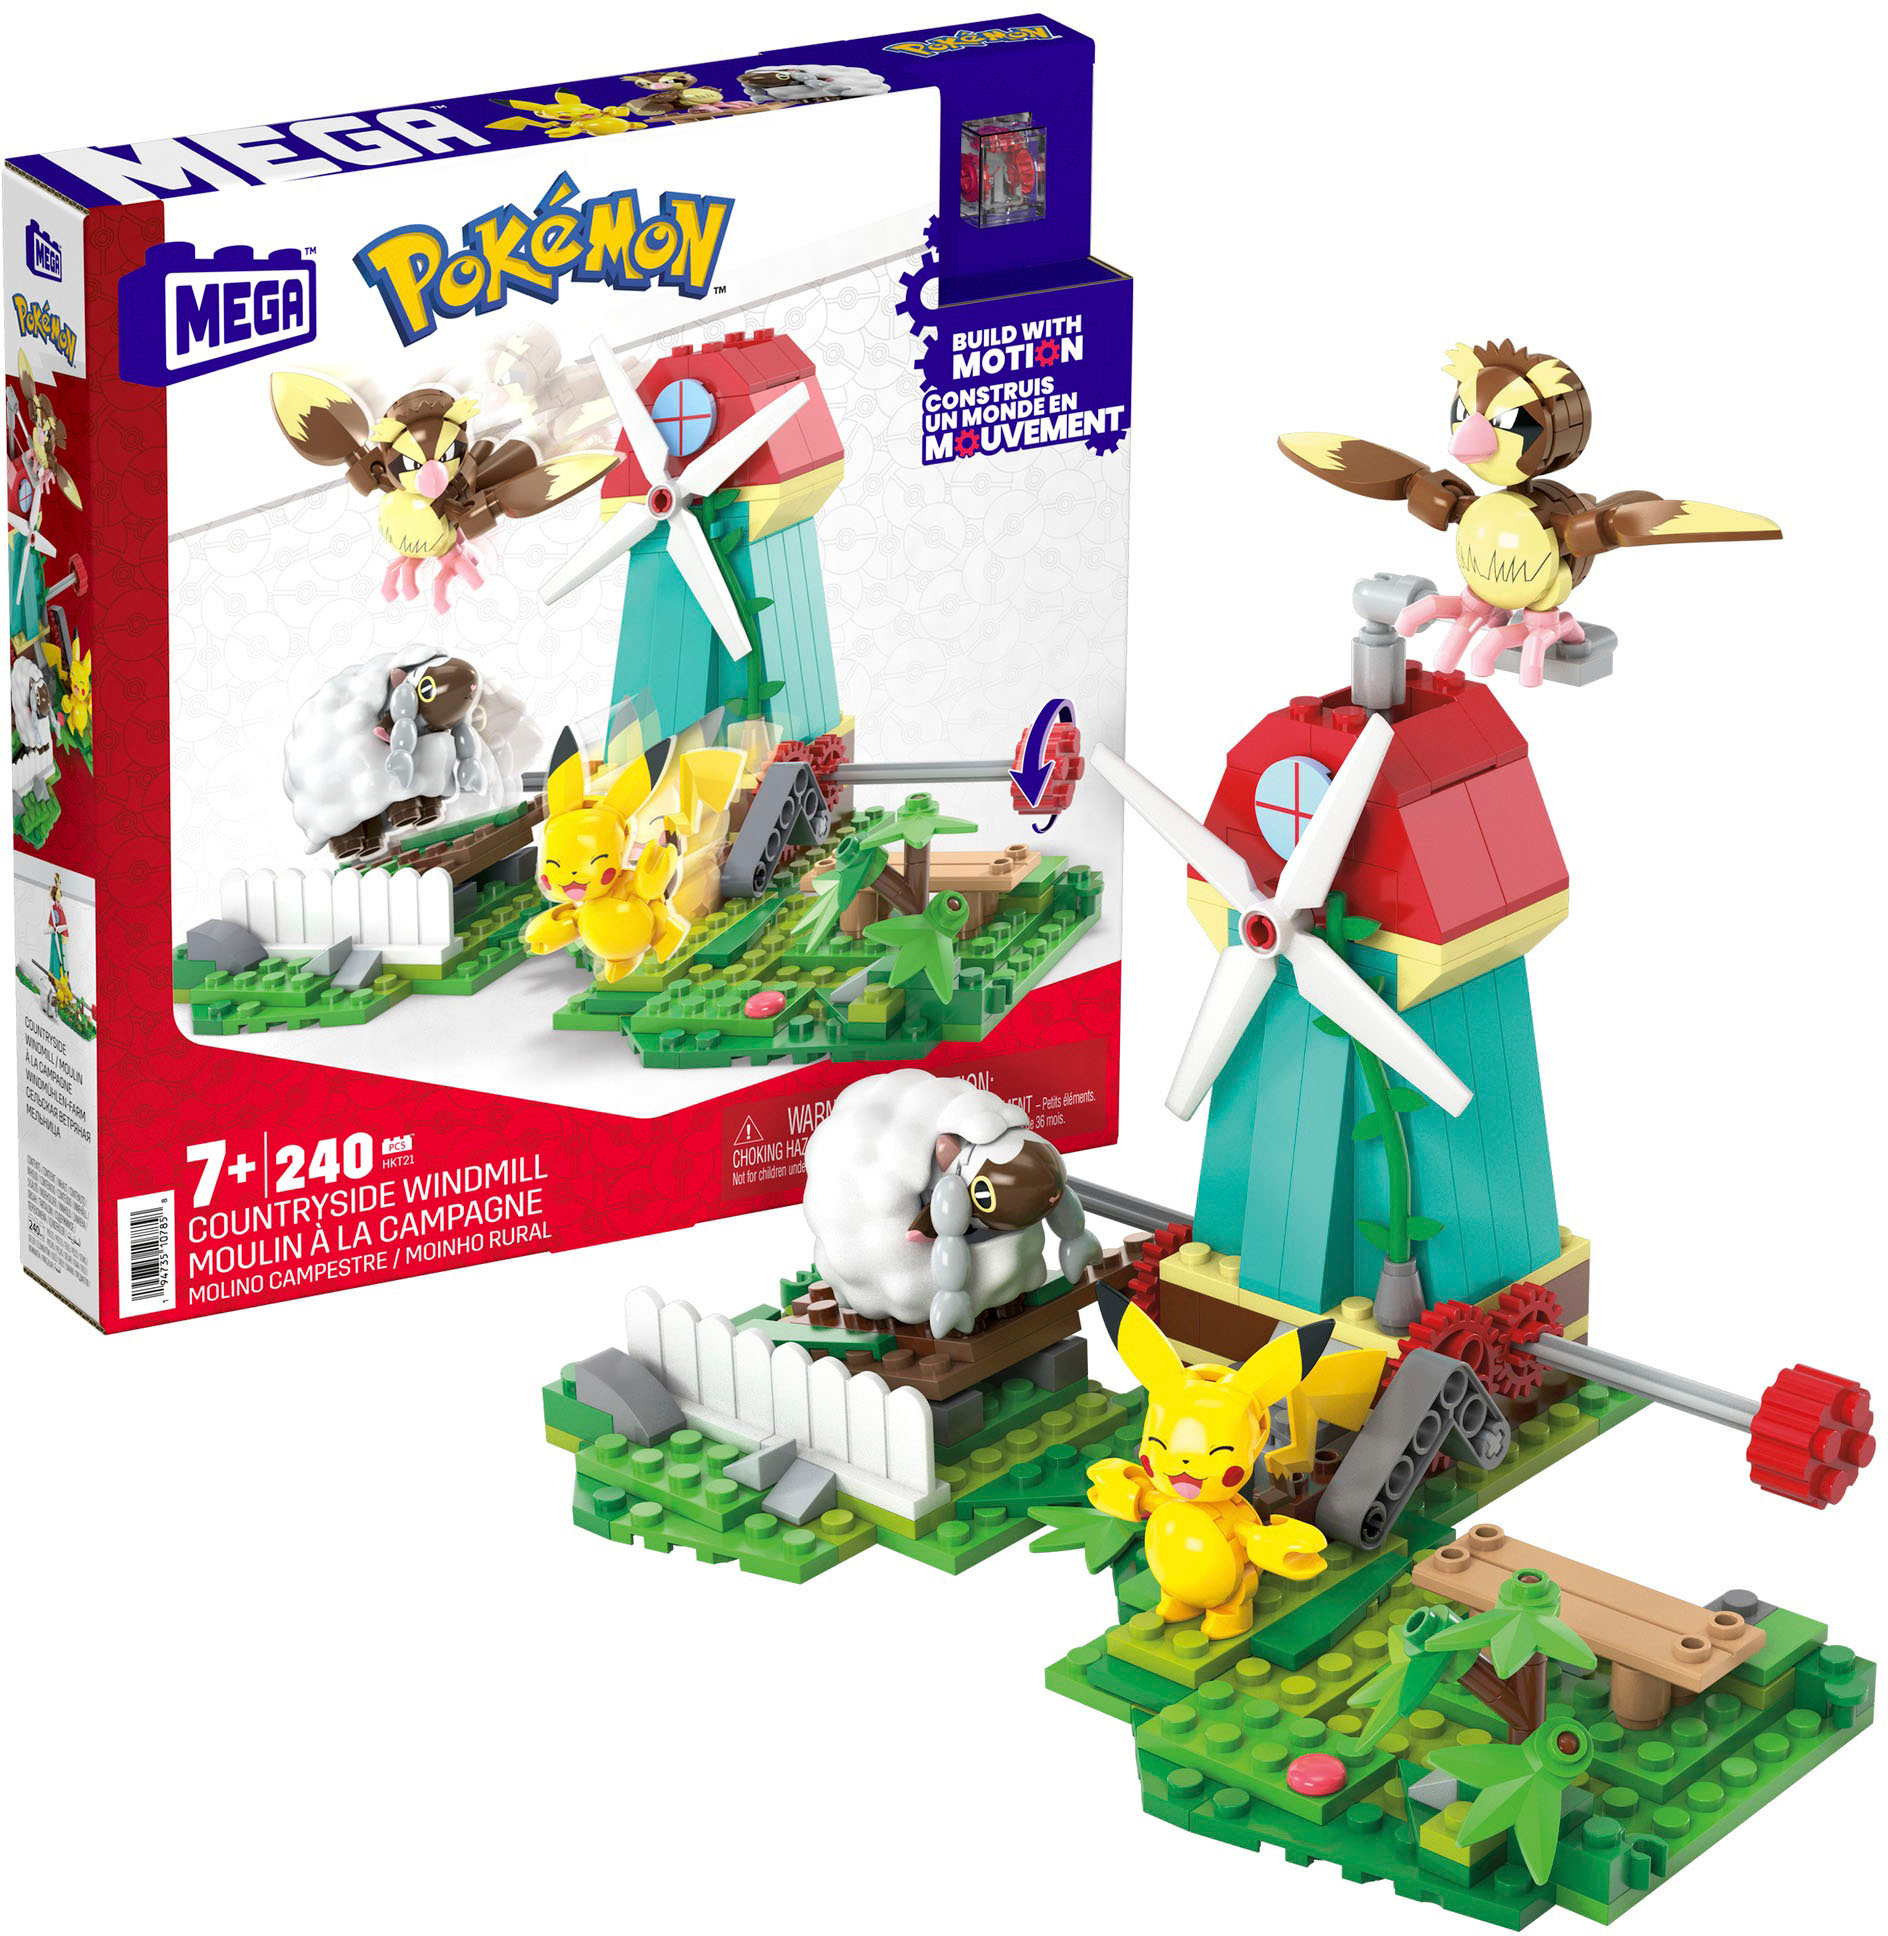 Are there any Pokémon Lego sets?